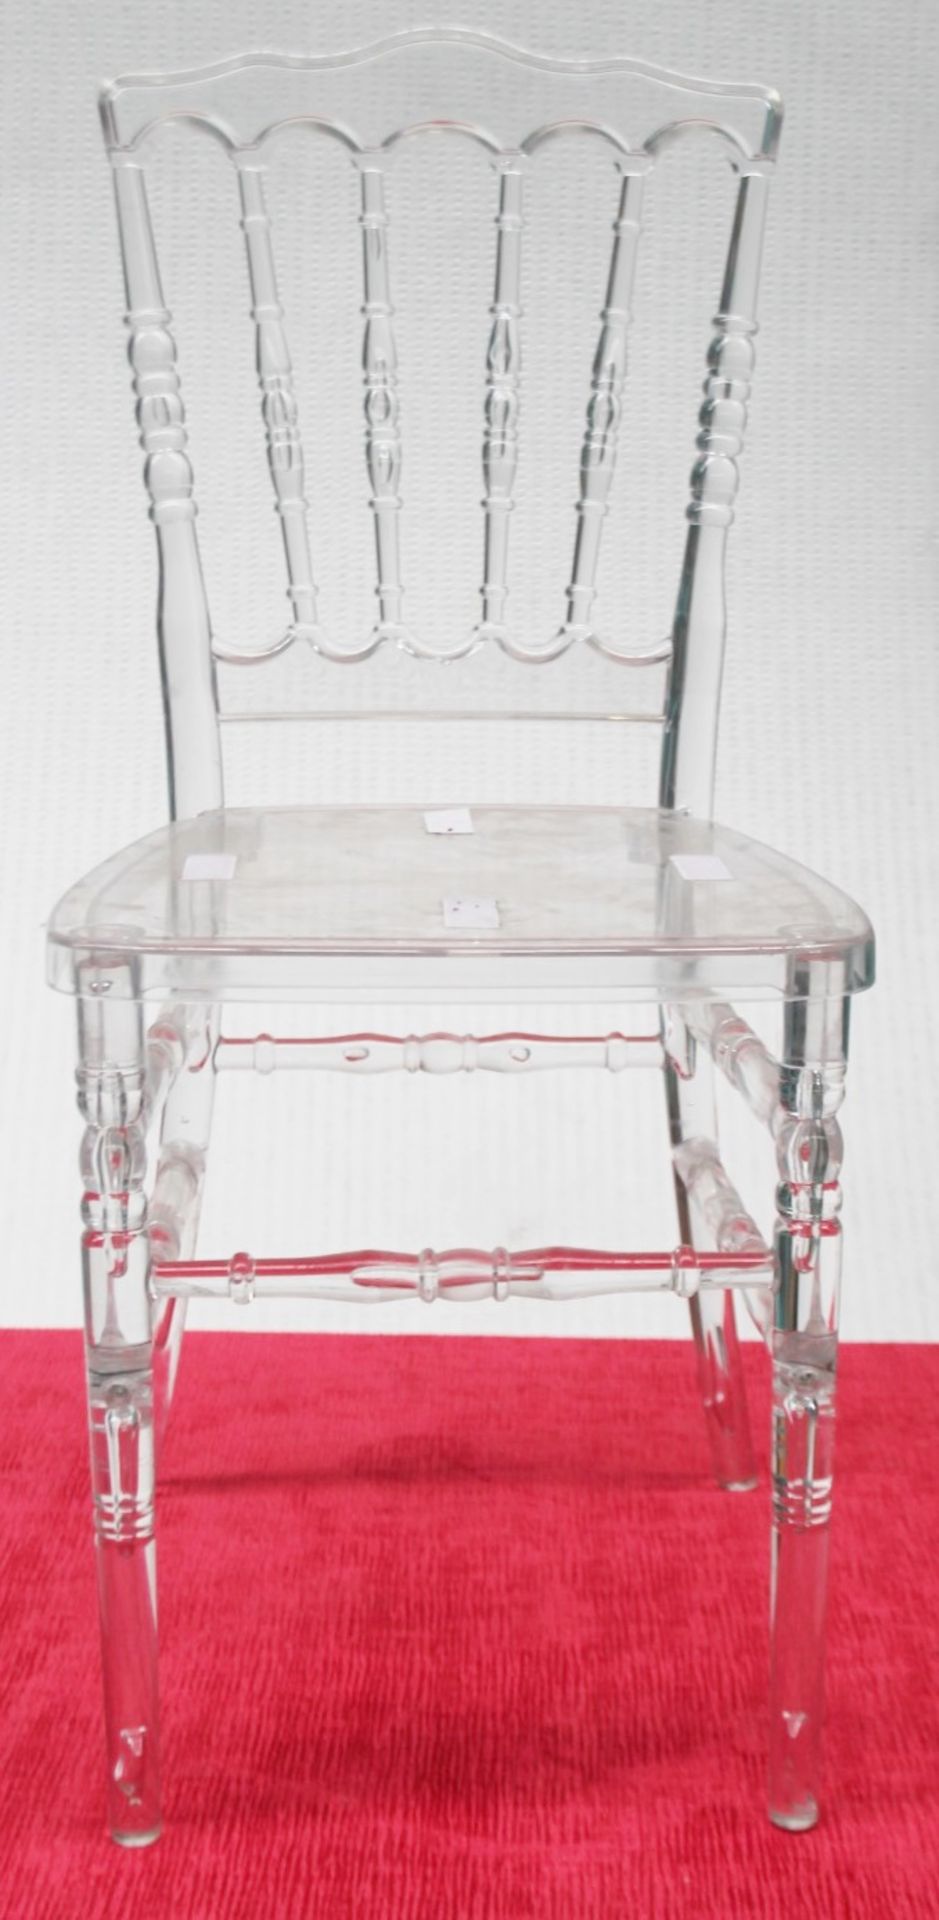 10 x High Quality Clear Acrylic Spindle Back Commercial Dining Chairs With Removable Seat Pads - Image 3 of 10